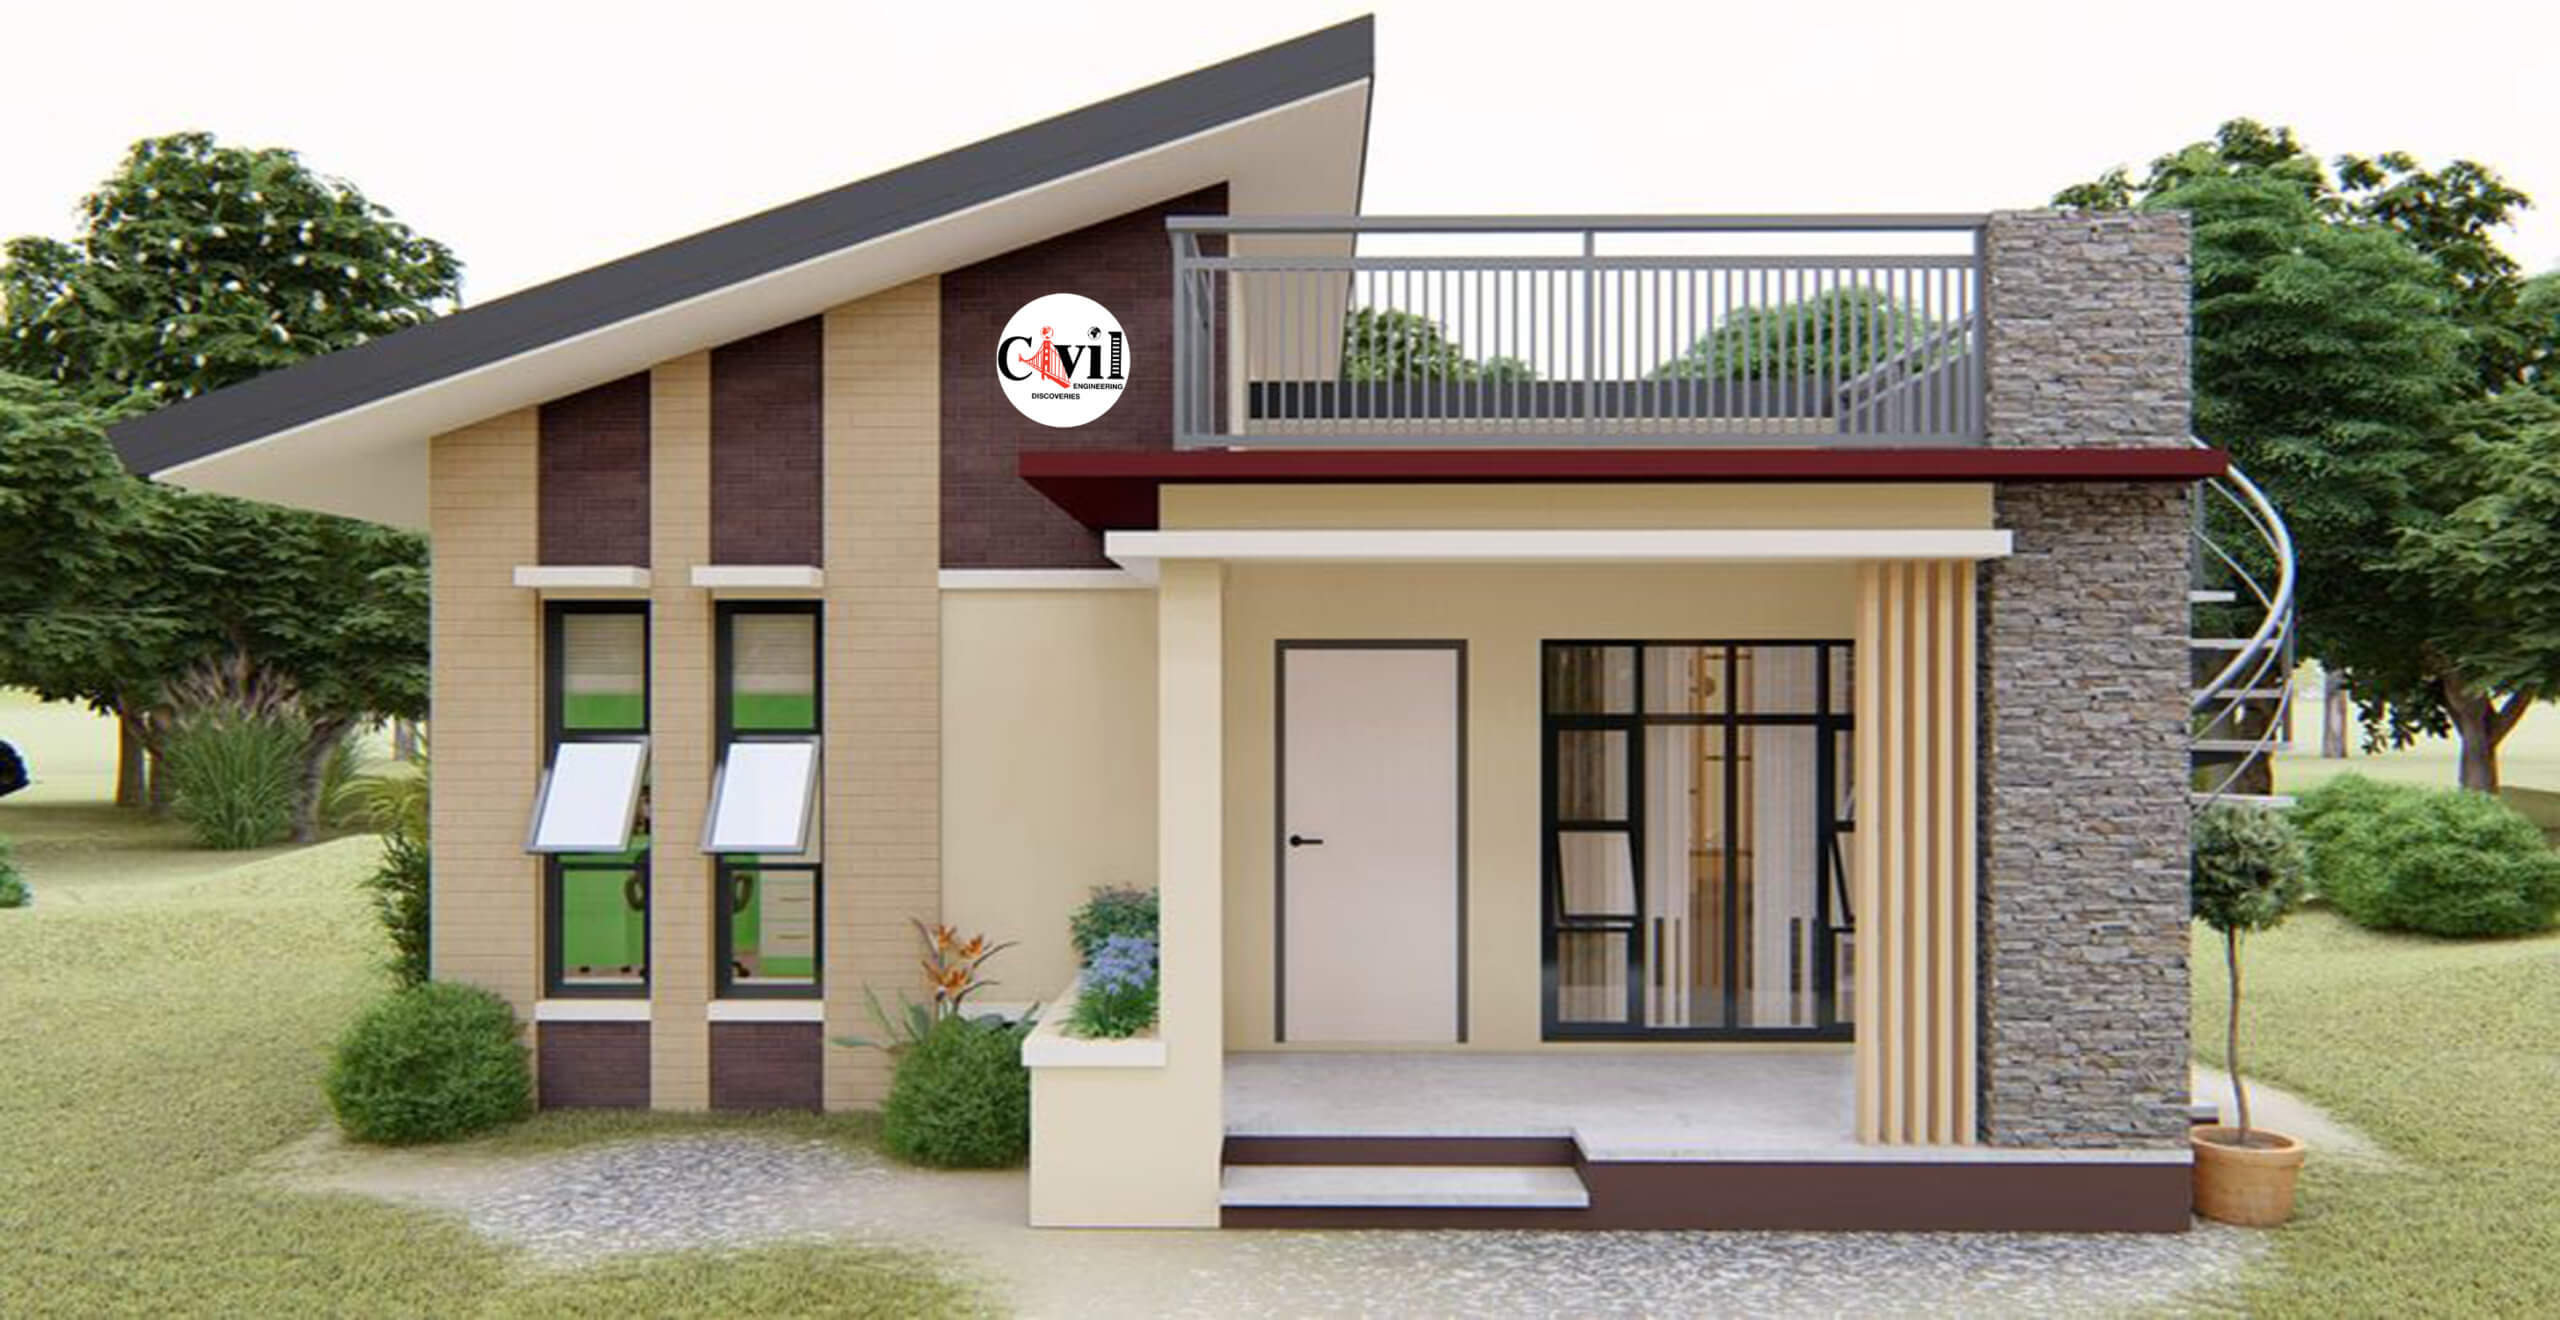 80 SQ.M. Modern Bungalow House Design With Roof Deck Scaled 1 